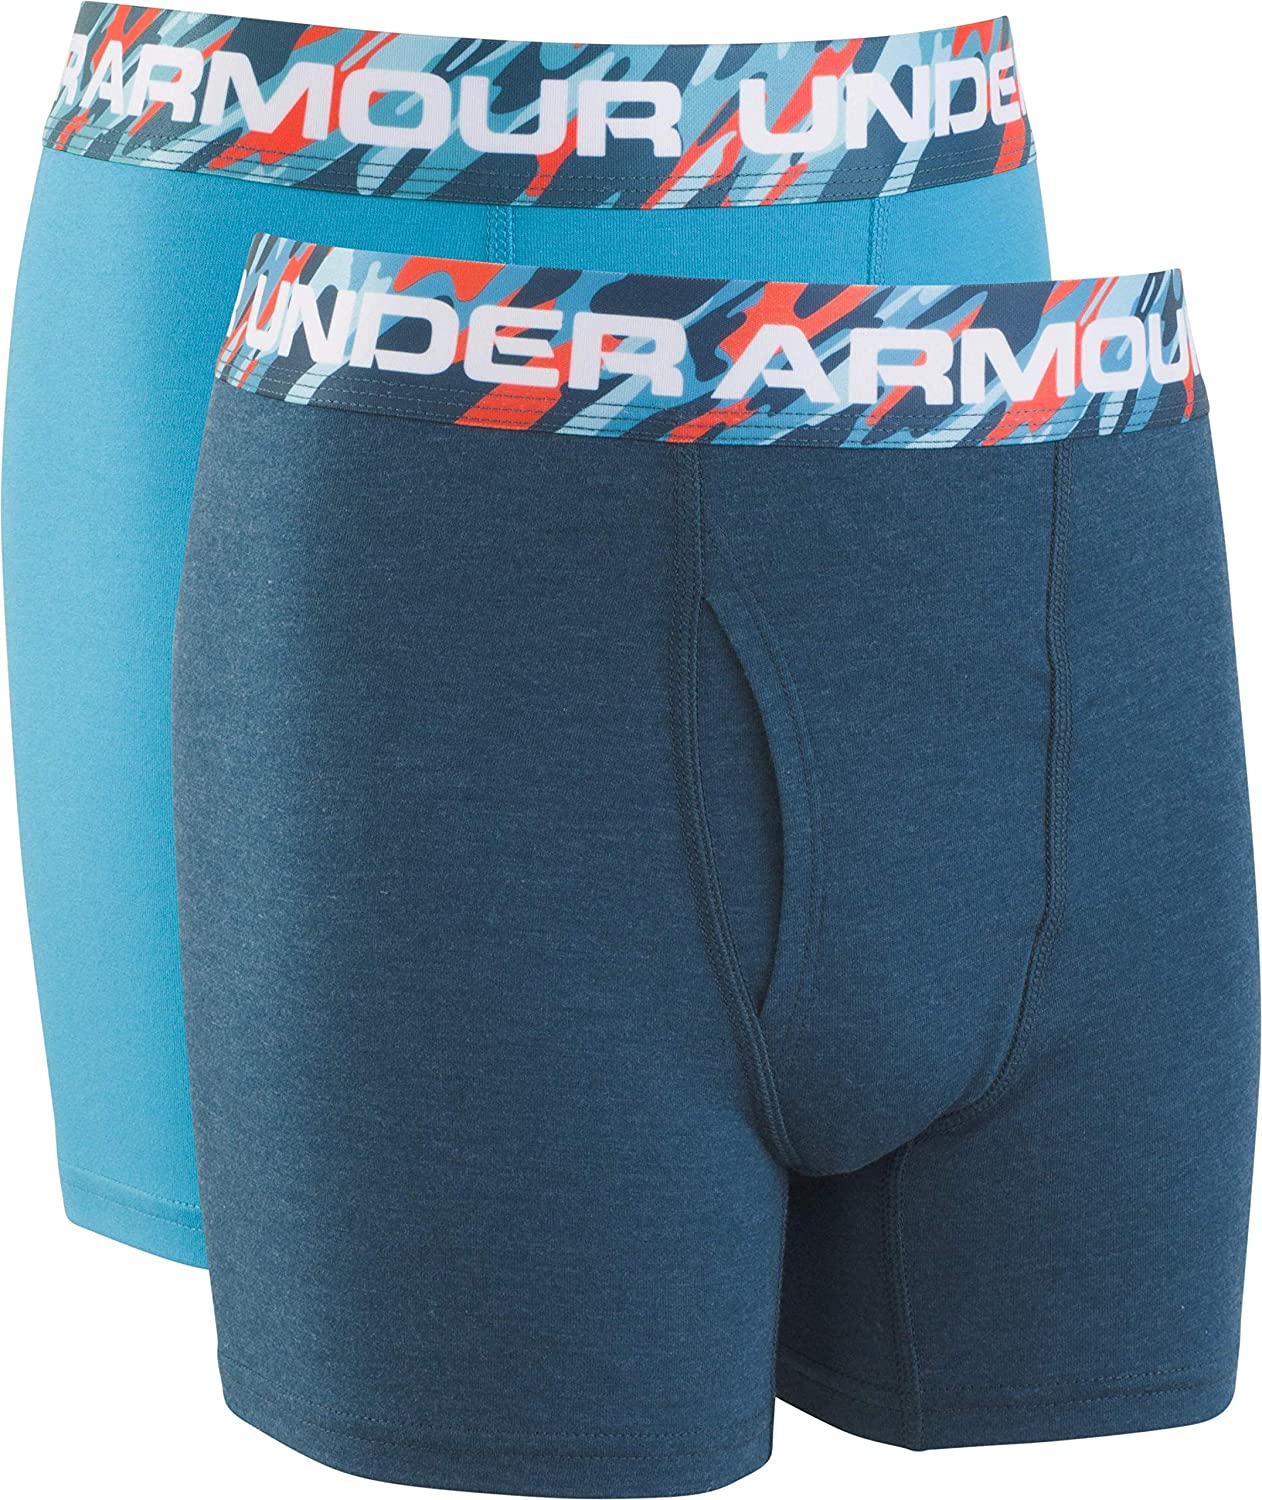 Under Armour Boys Big Charged Cotton Stretch Boxer Jock YMD Deceit/Techno Teal 